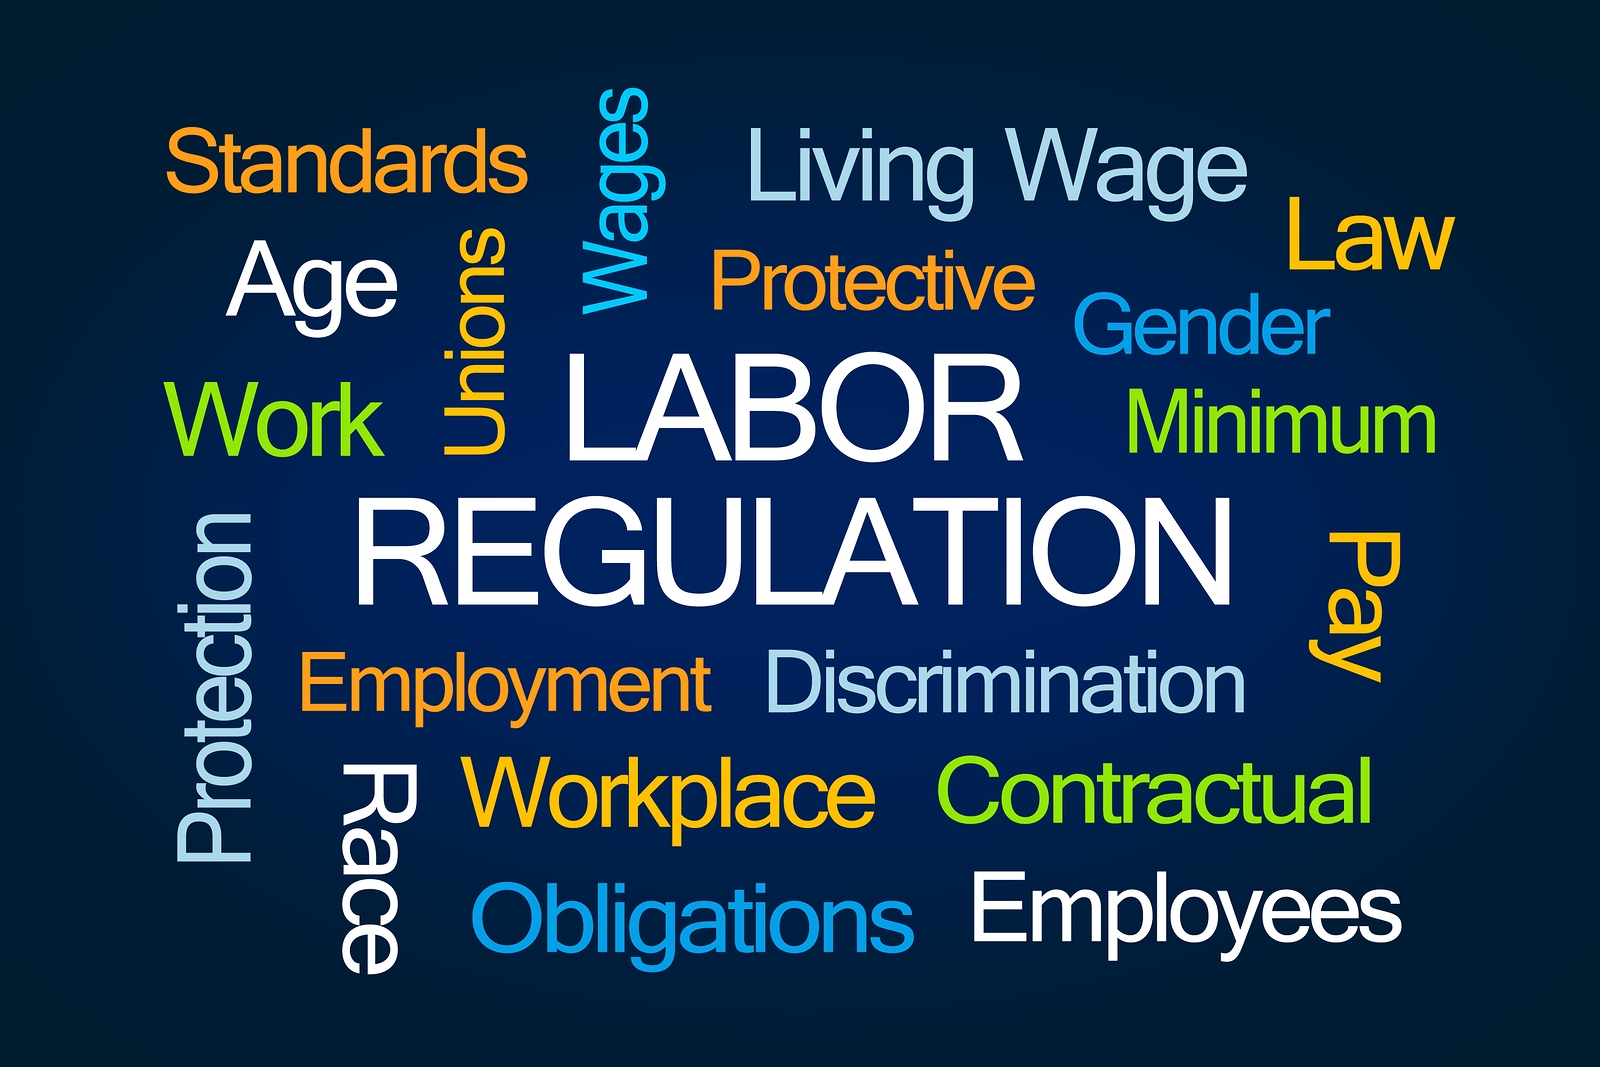 A labor regulation word cloud depicting some key labor regulation buzzwords that will be affected by Washington Initiative 1433